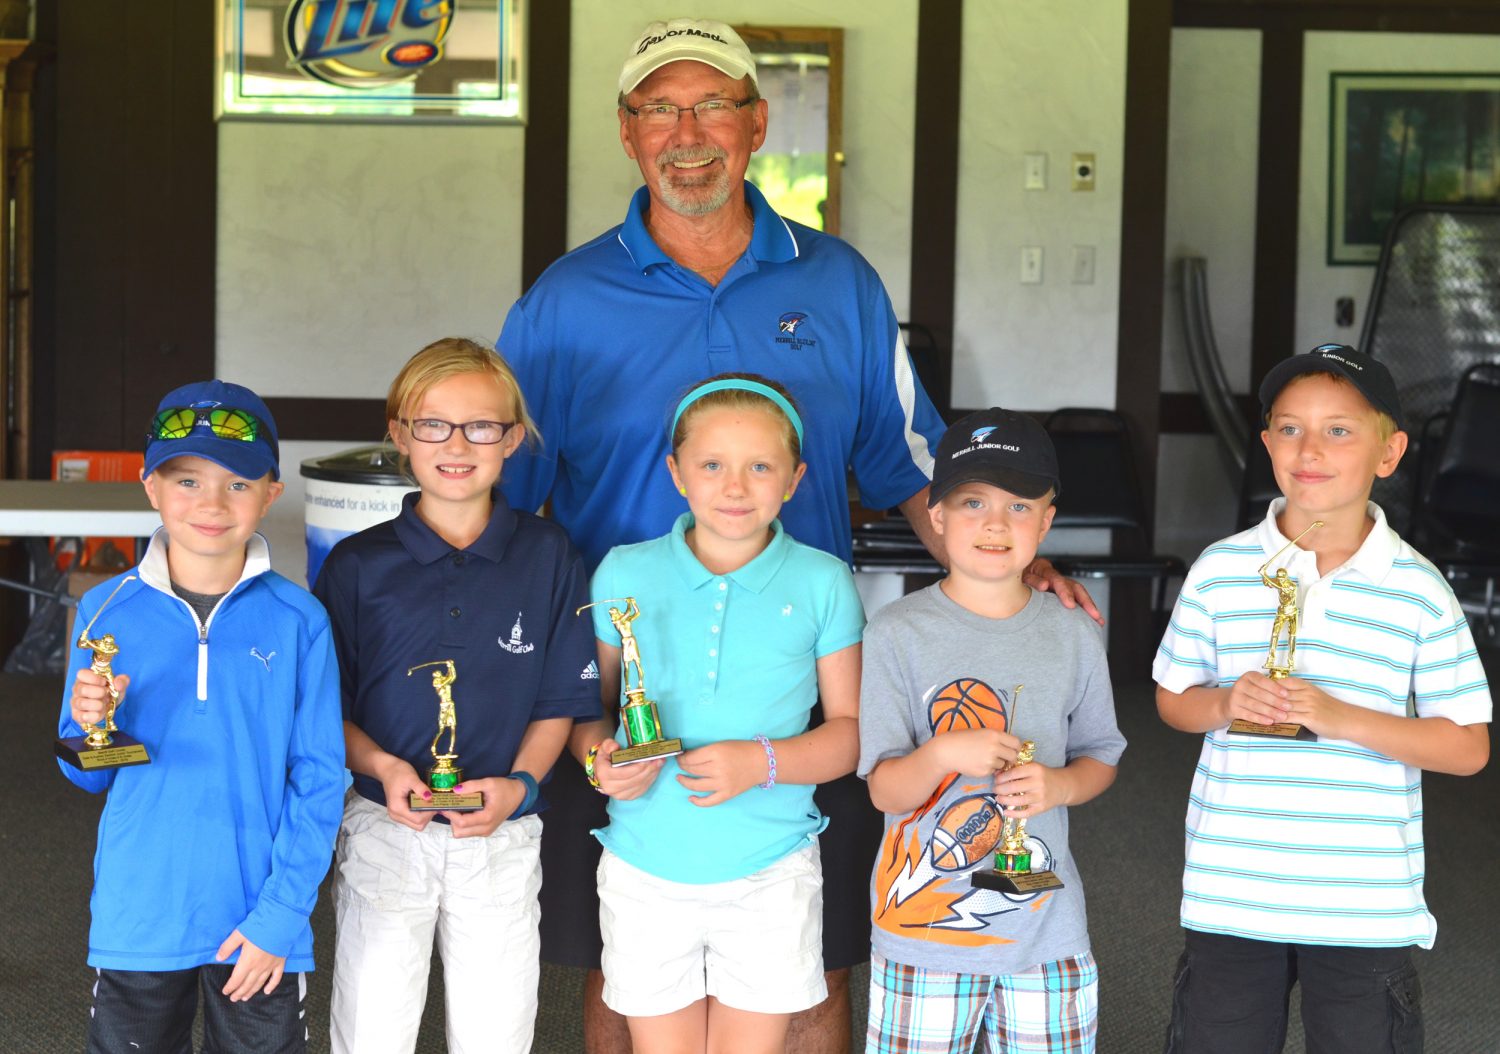 Children hit the links at Merrill Golf Course